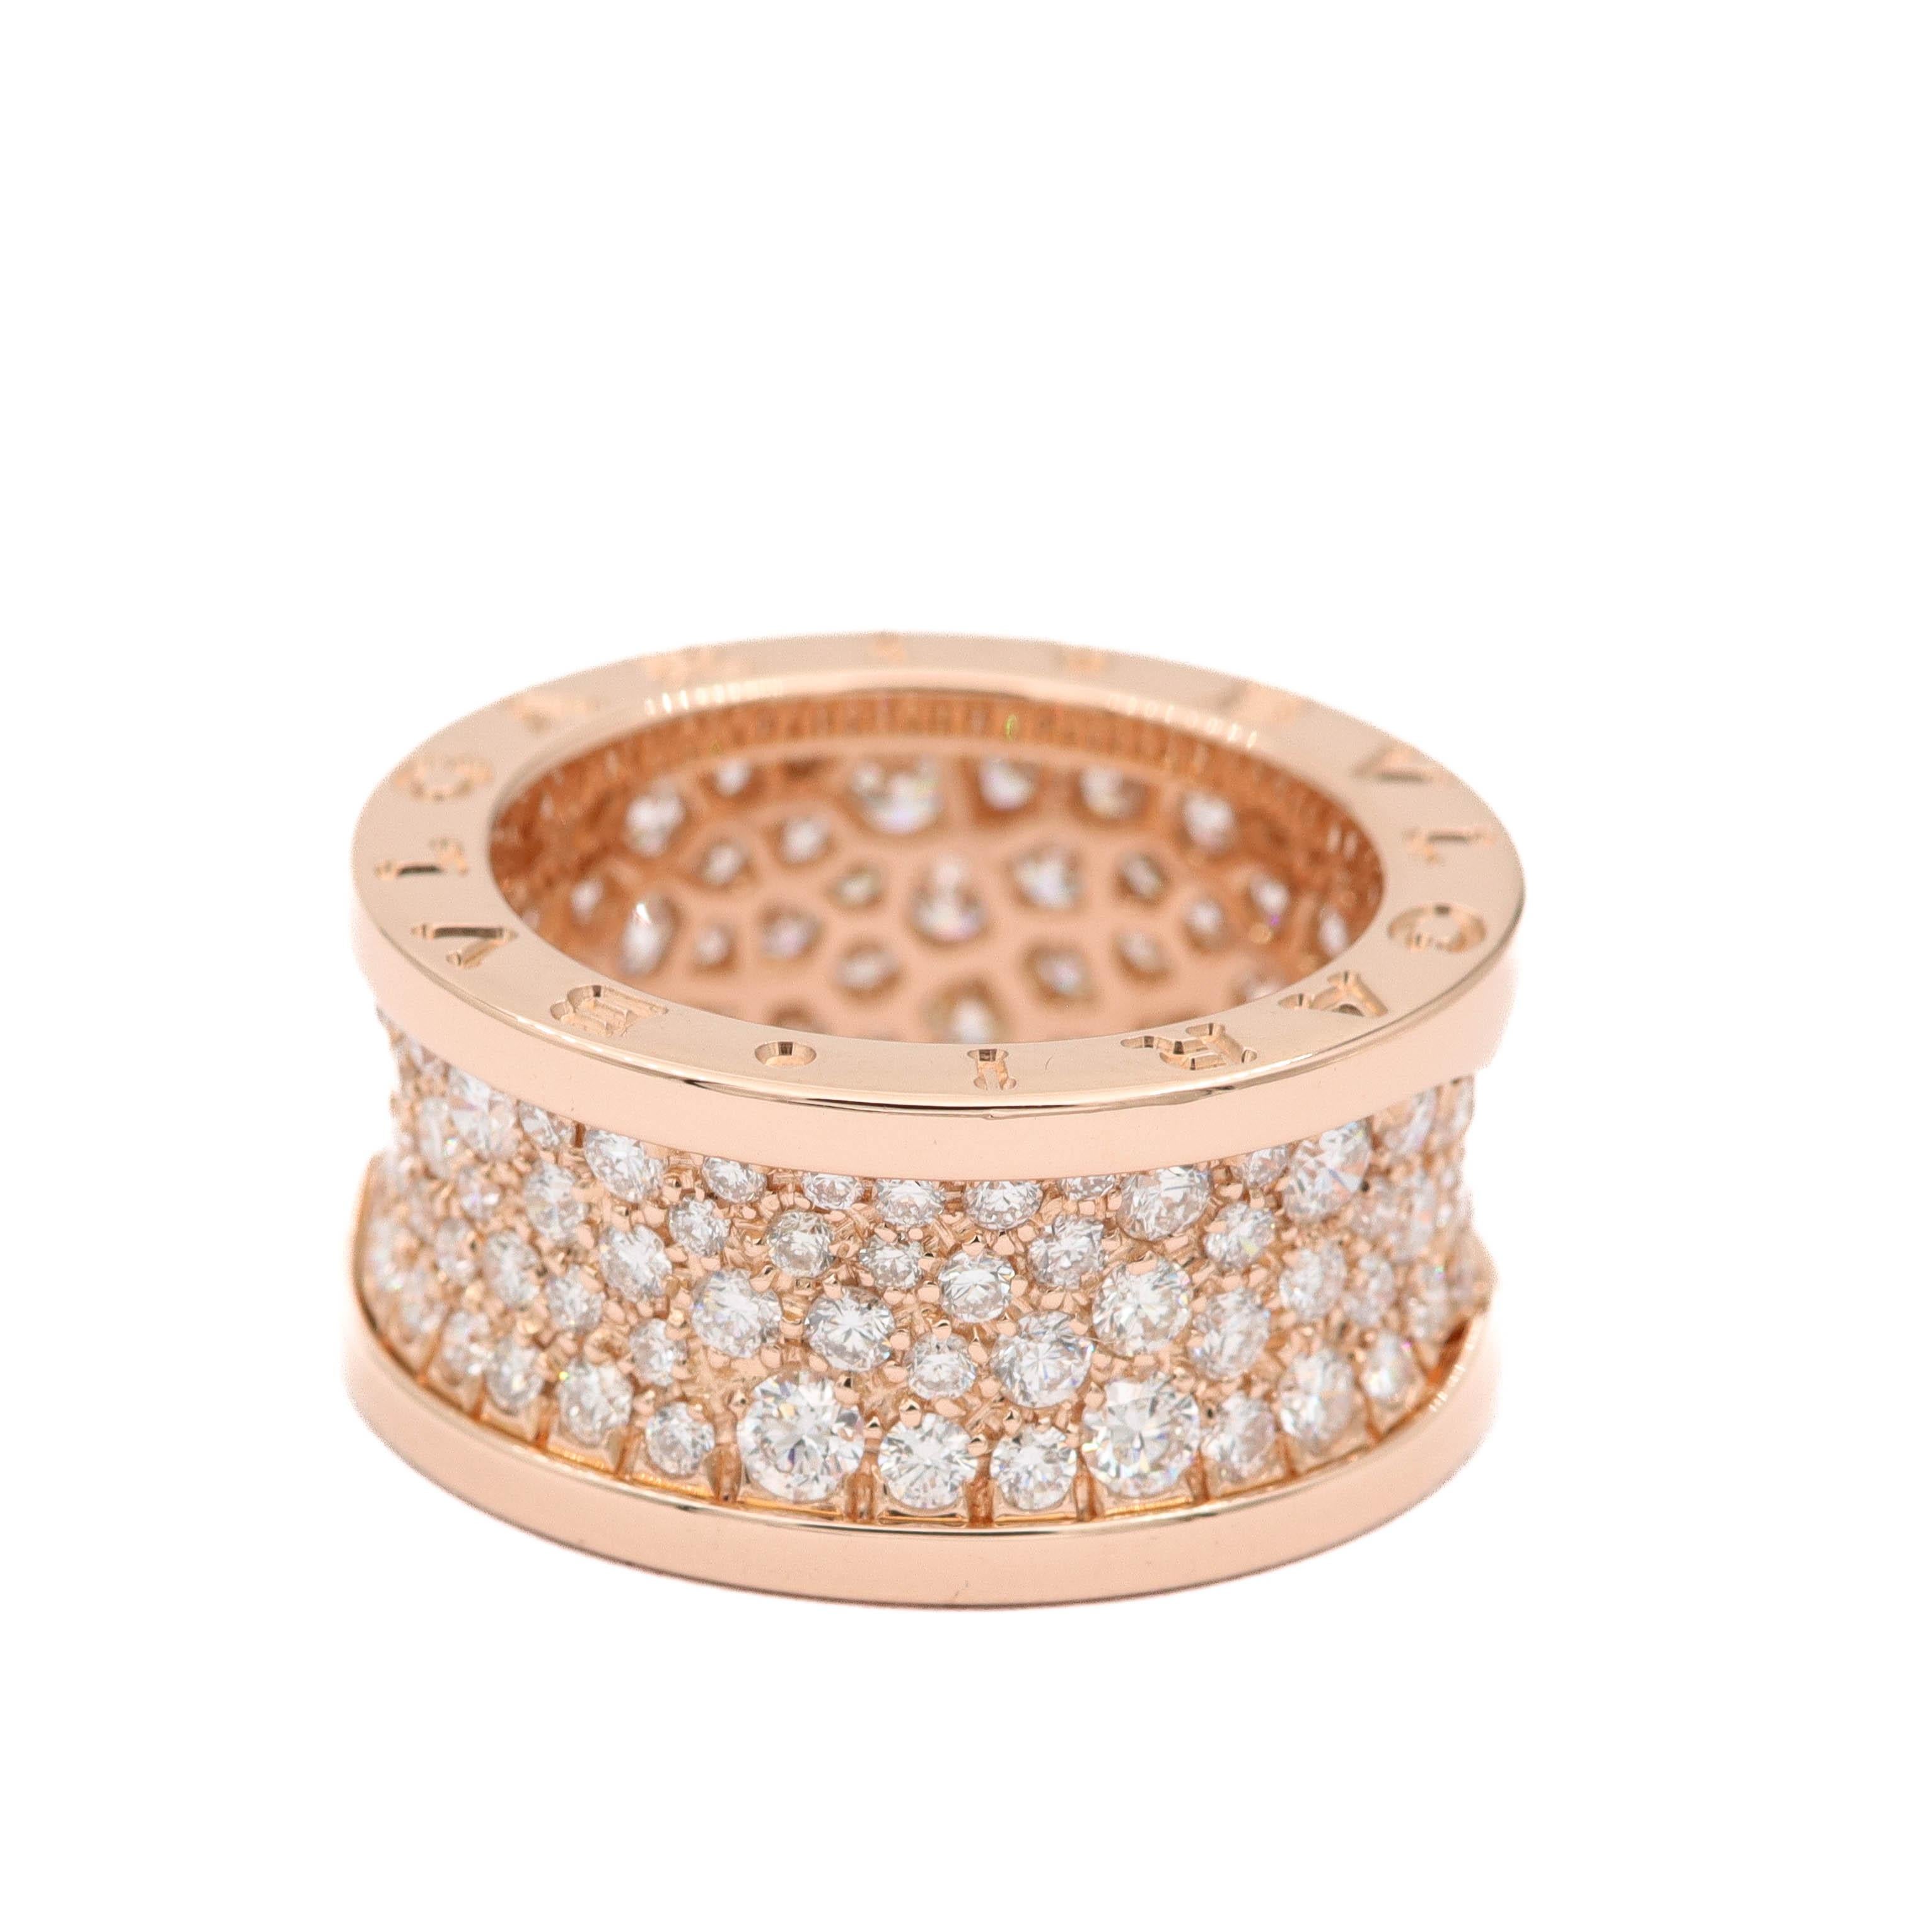 Iconic women's ring from Bvlgari's popular B.zero1 collection. Made in 18k rose gold and set with an estimated 2.10 carats of sparkling round diamonds.
Condition: Very good condition
Stones: Diamonds
Diamond color, clarity: F-G color , VVS1-VS1